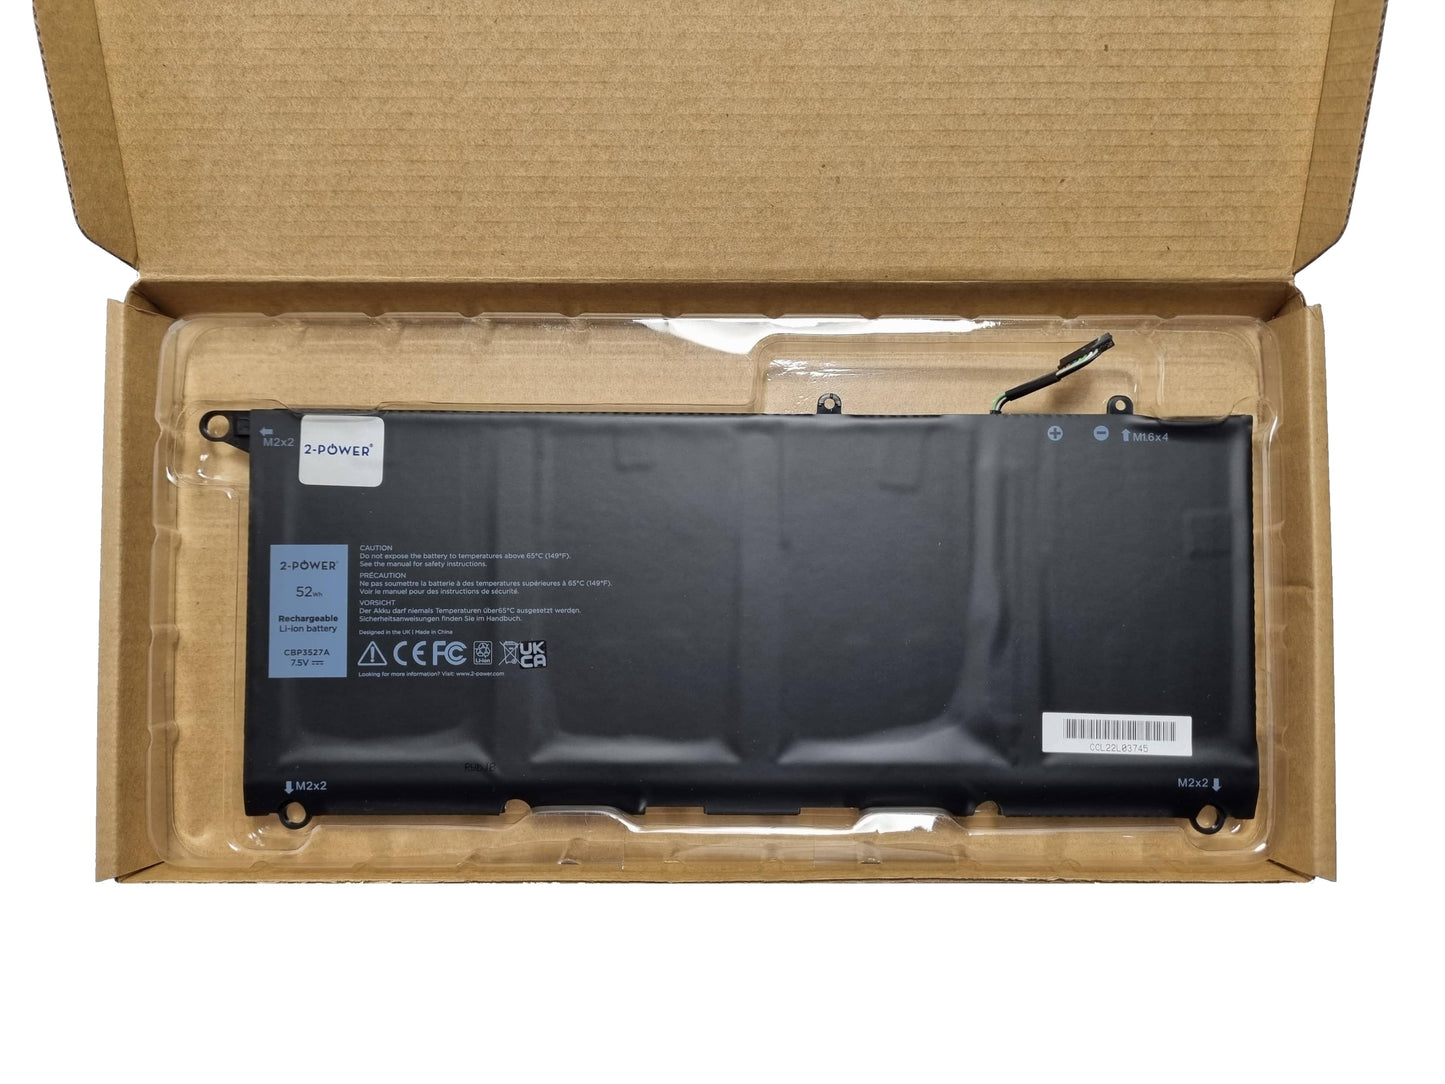 2 power Compatible Dell XPS, 9350, 9343 Battery 52Wh 4 Cell 6100 mAh JD25G 5K9CP 90V7W